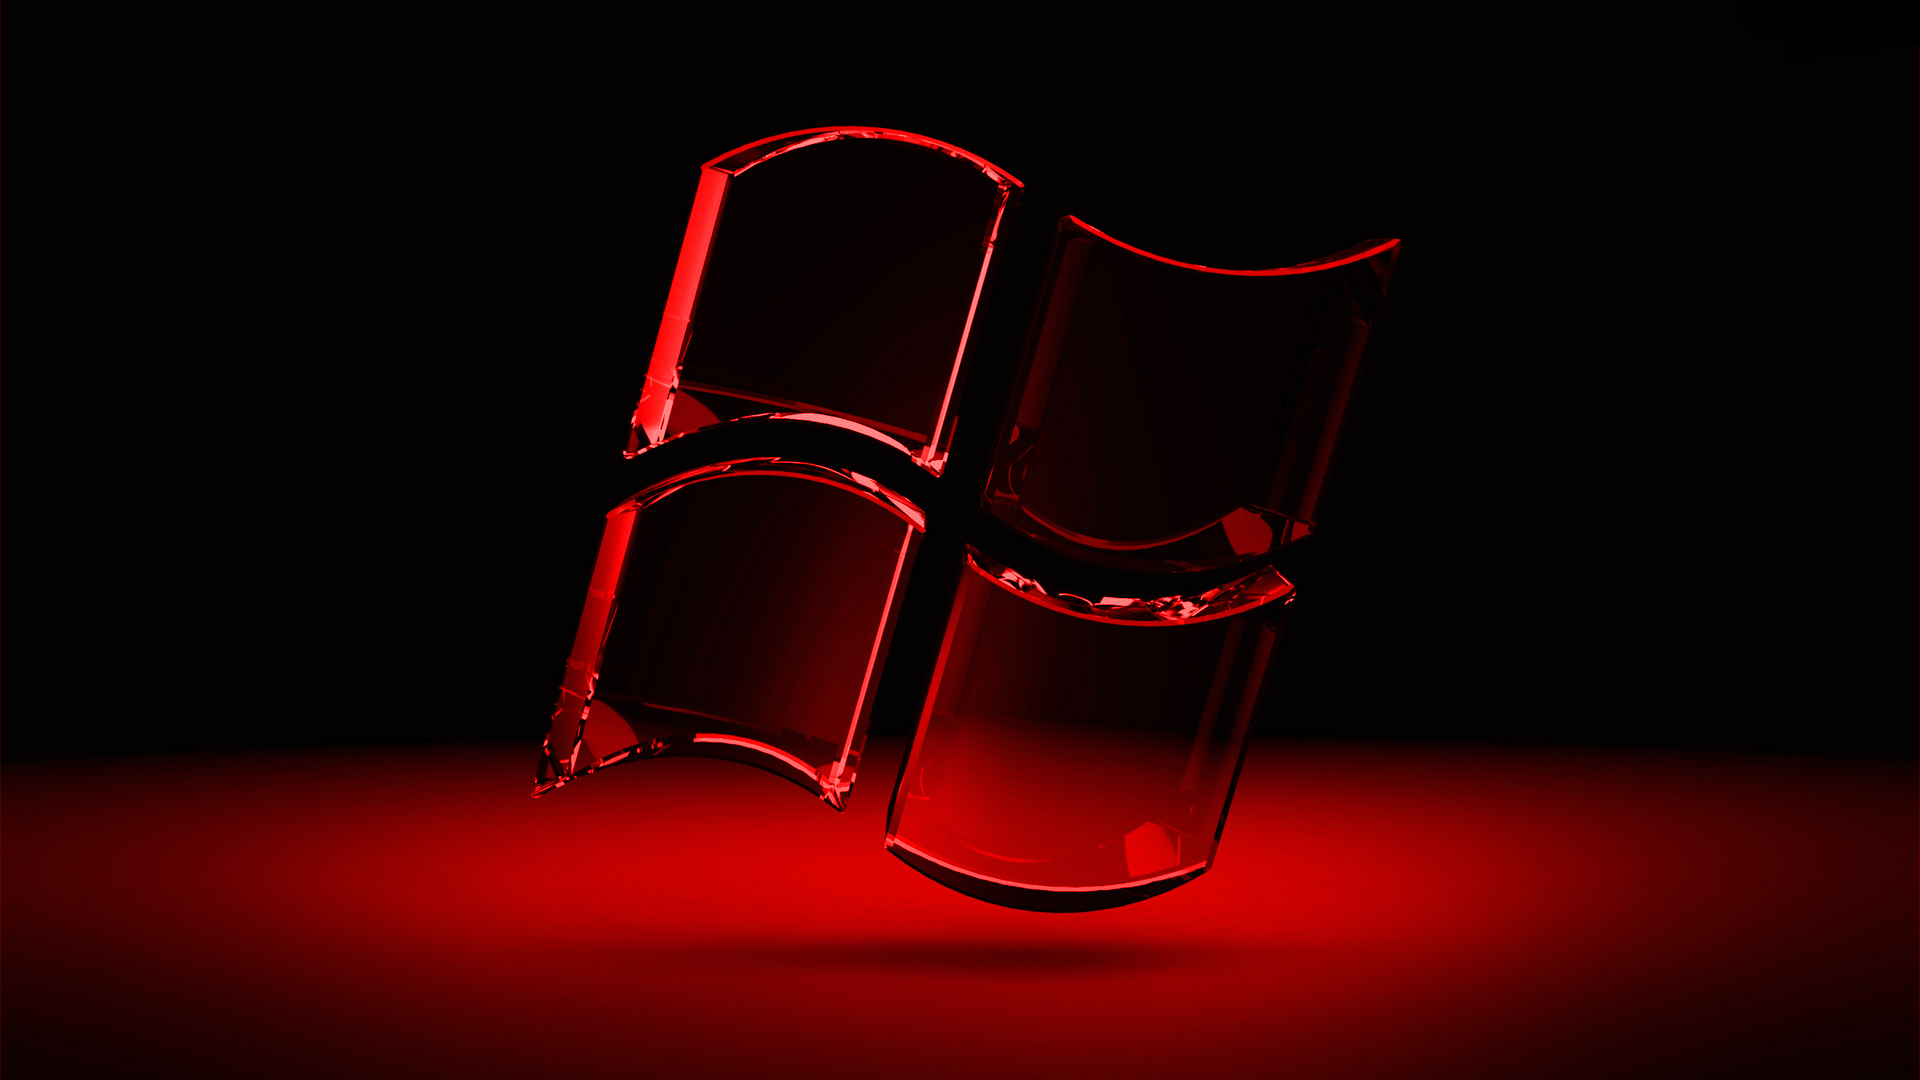 Red Windows Wallpaper Free Red Windows Background